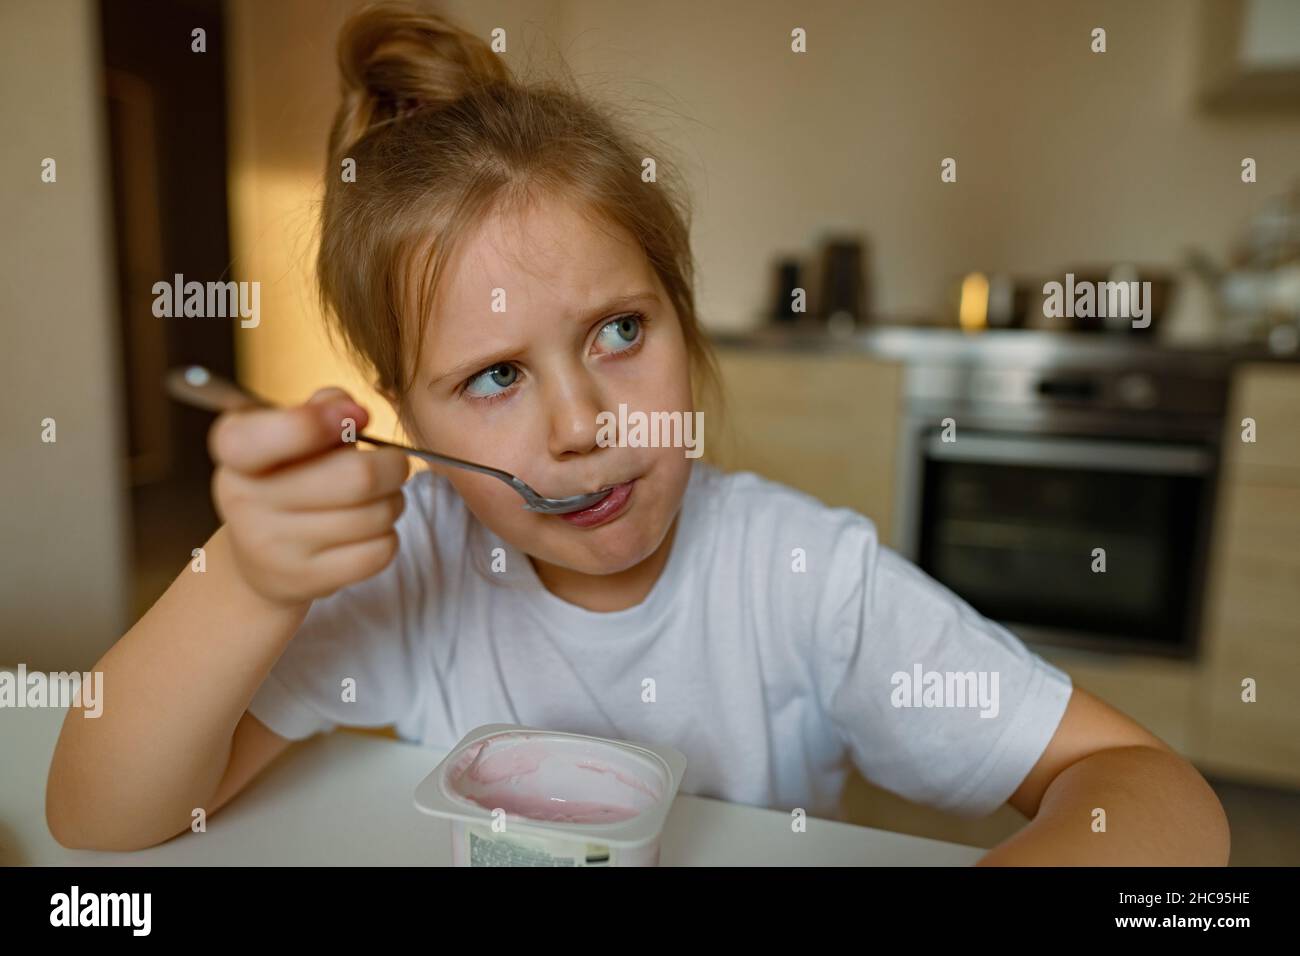 Cute girl eats yogur with appetite, has dirty mouth, has fun, grimaces Stock Photo